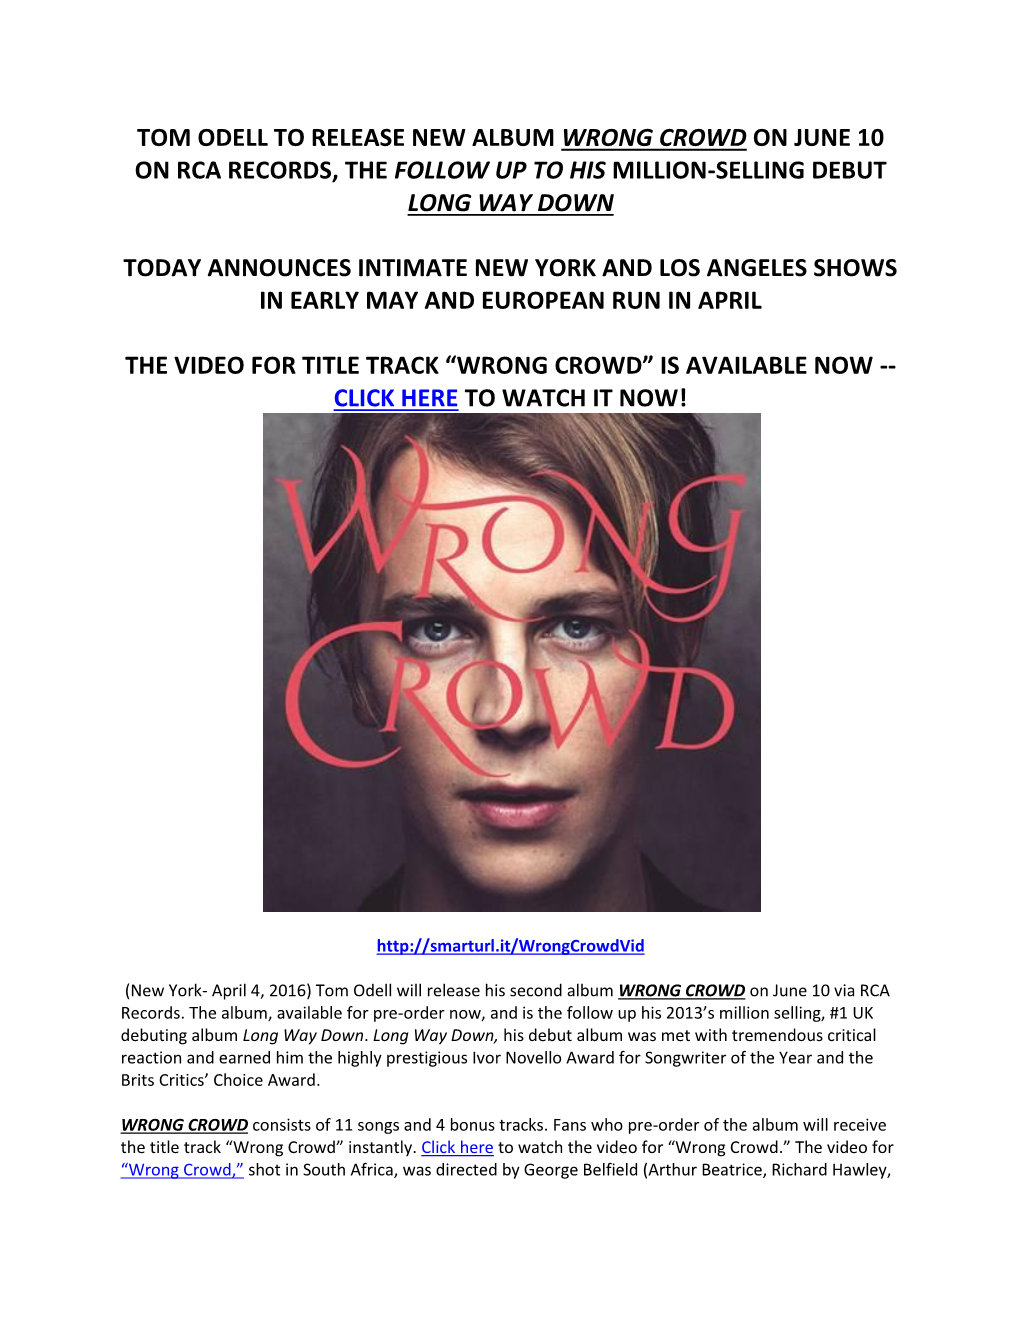 Tom Odell to Release New Album Wrong Crowd on June 10 on Rca Records, the Follow up to His Million-Selling Debut Long Way Down